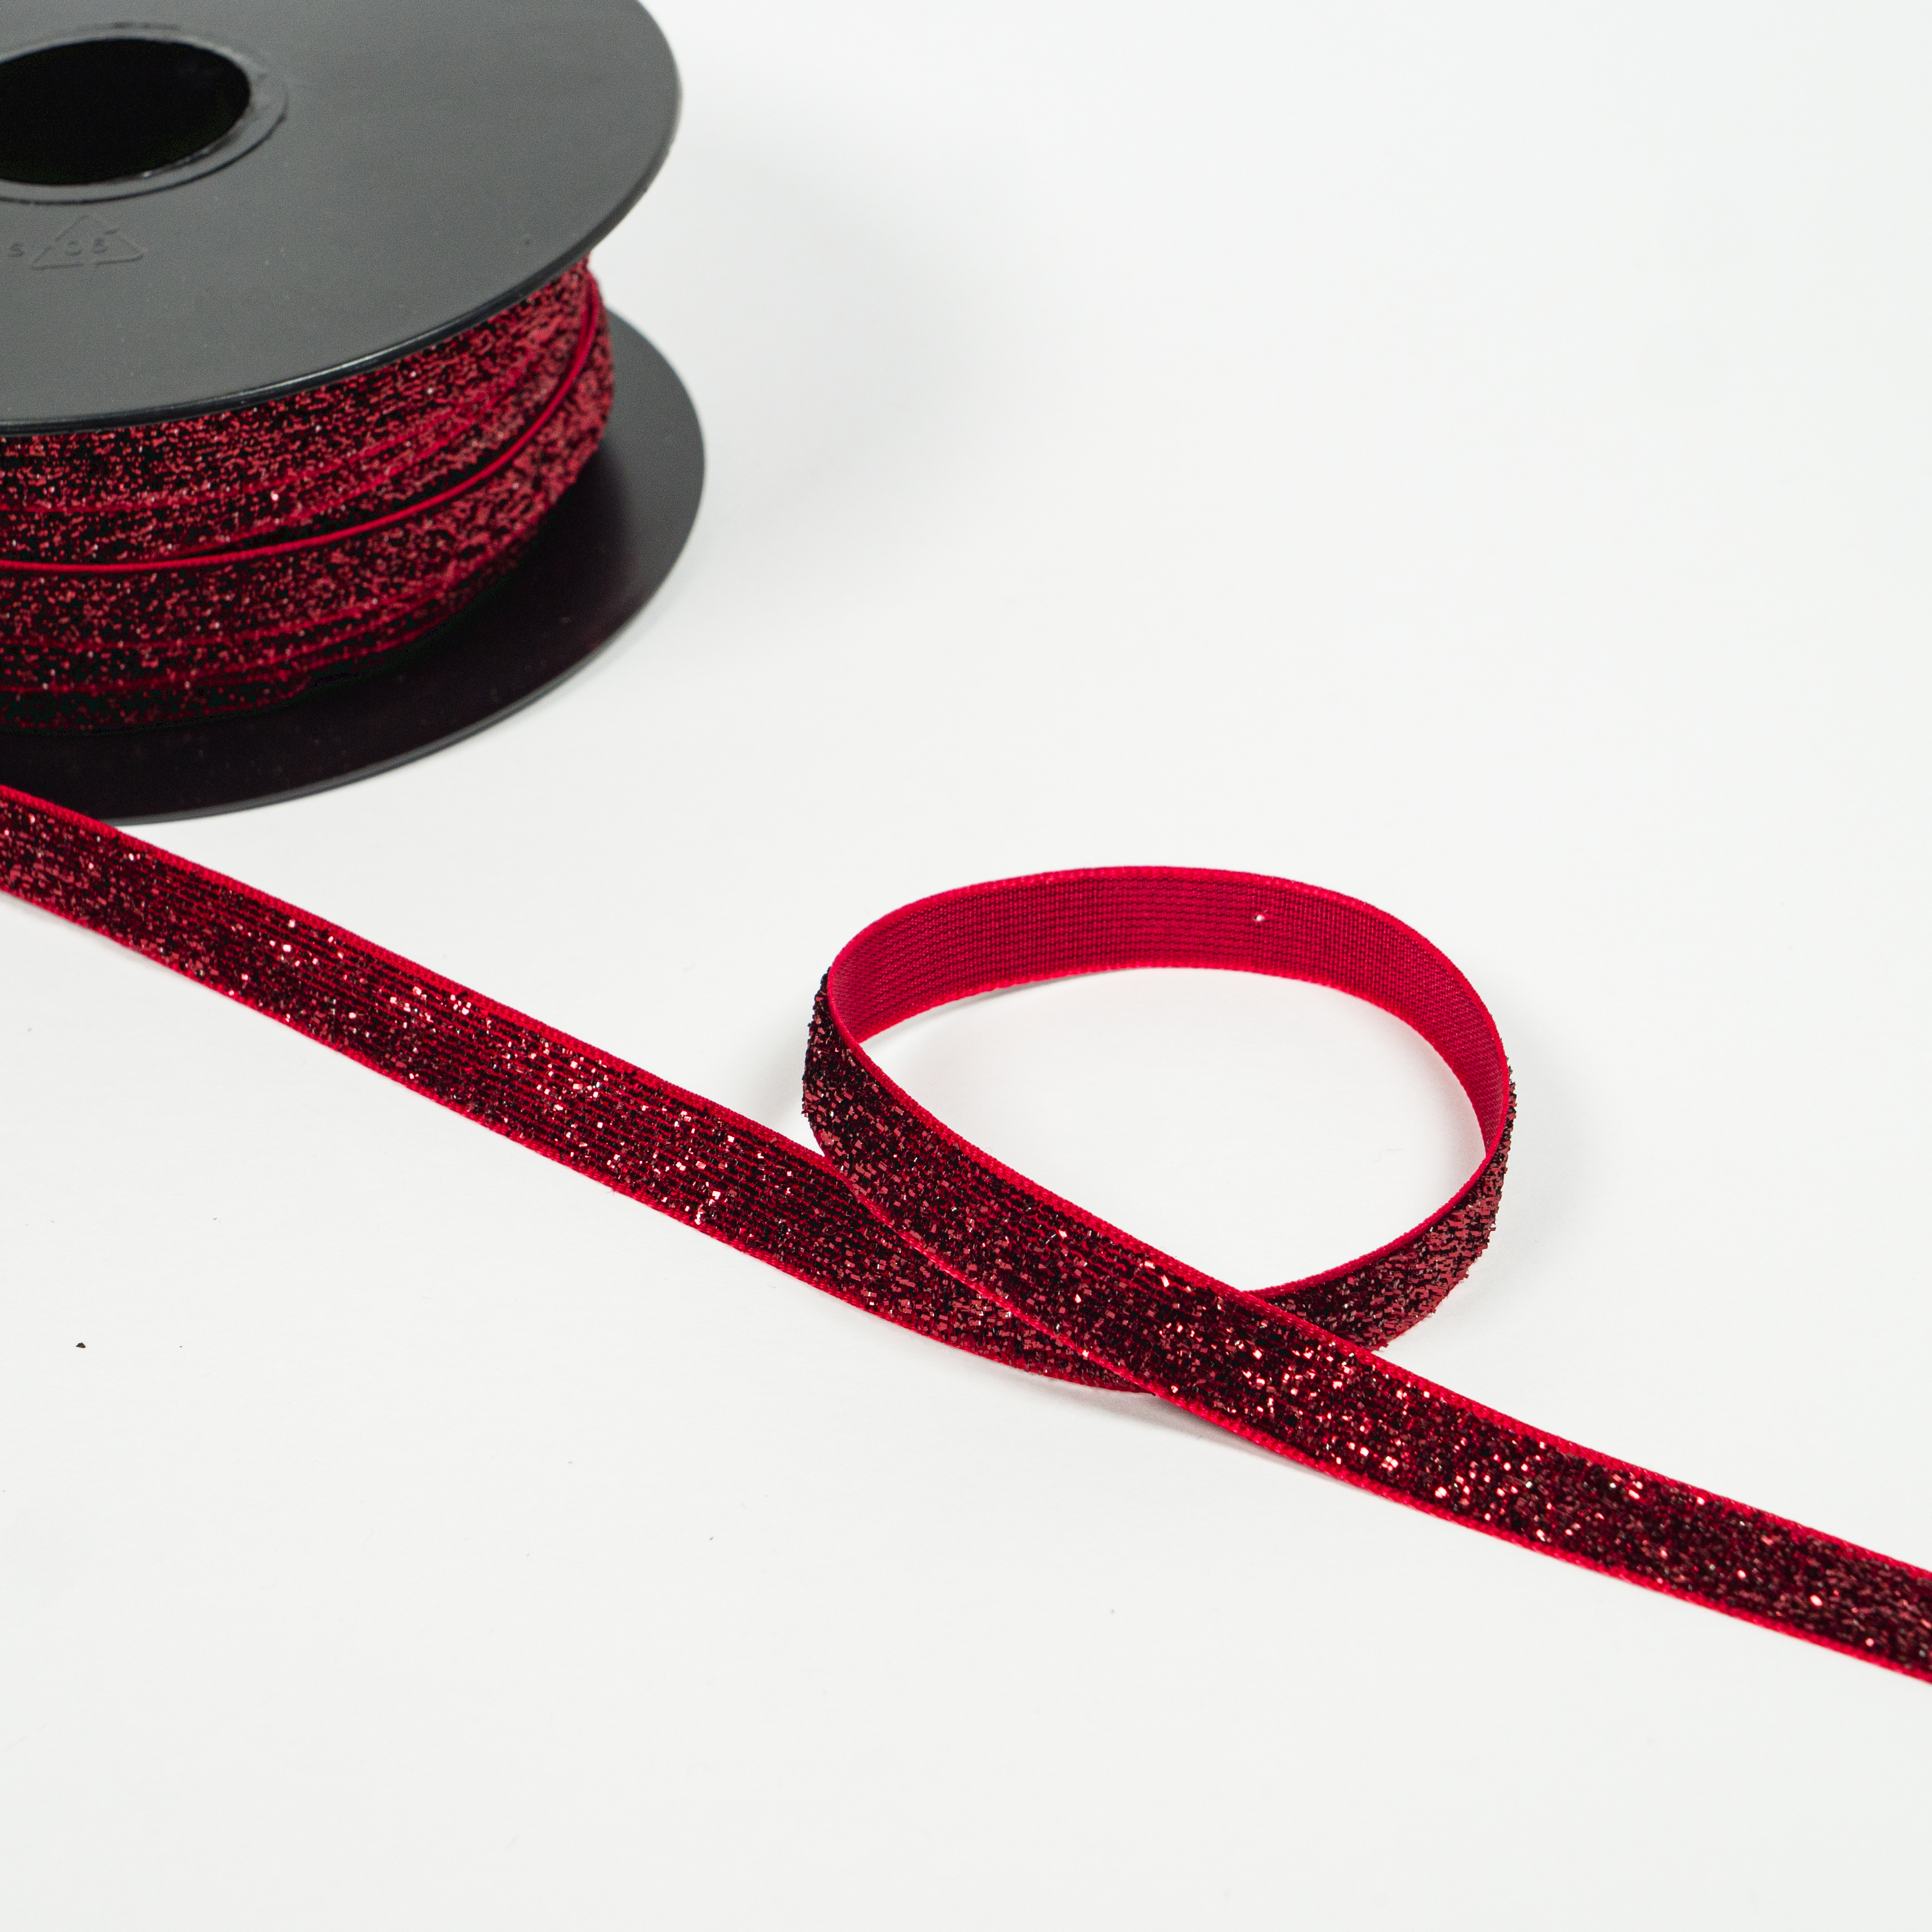 10MM GLITTER BAND 10 RED 20M 10 RED